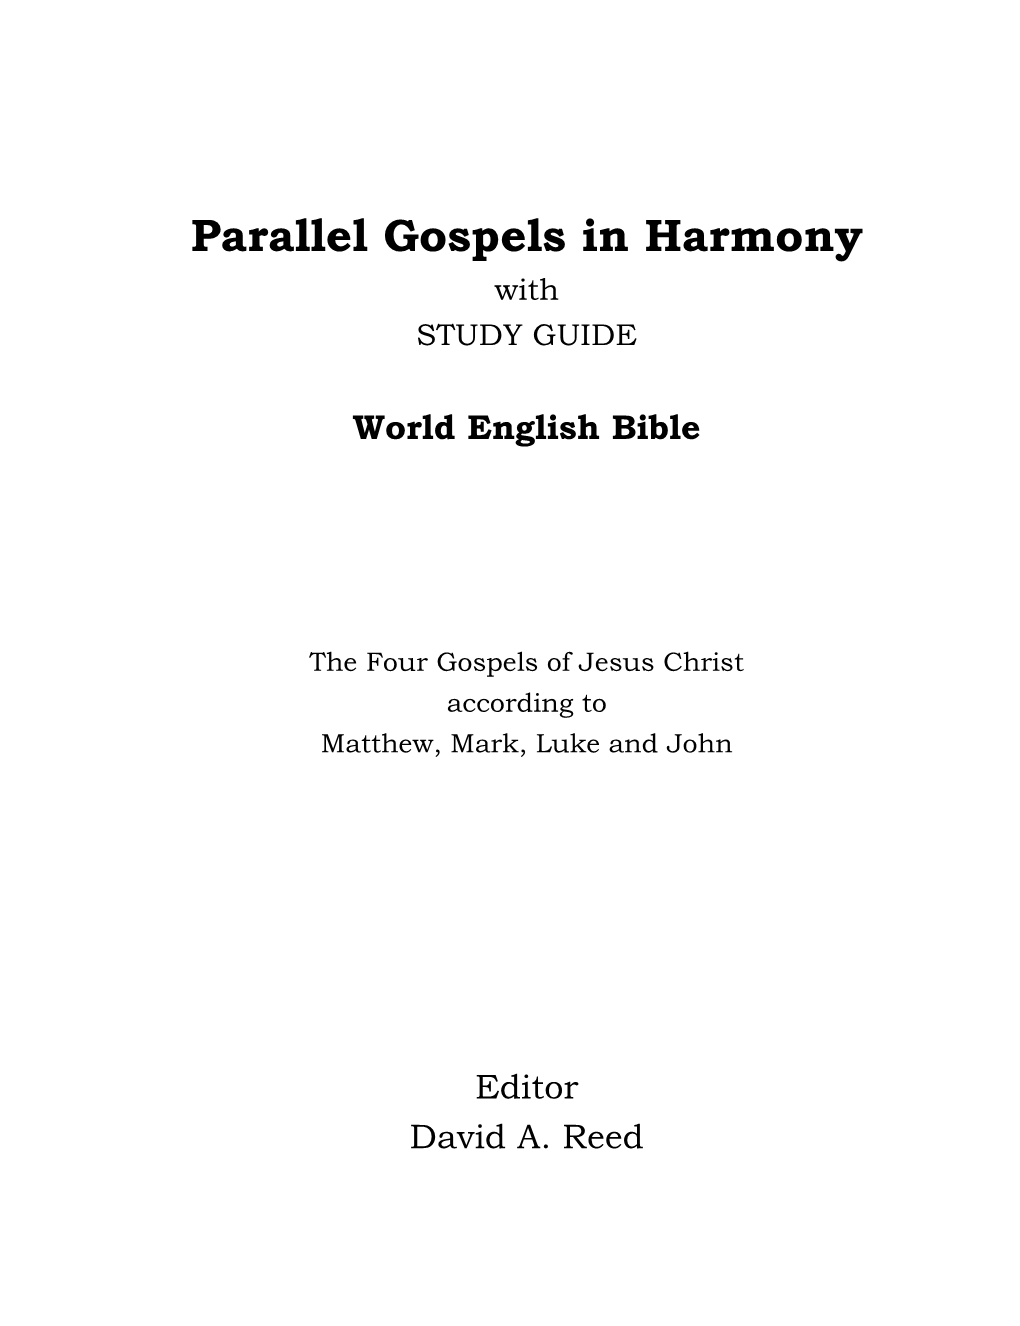 Parallel Gospels in Harmony with STUDY GUIDE